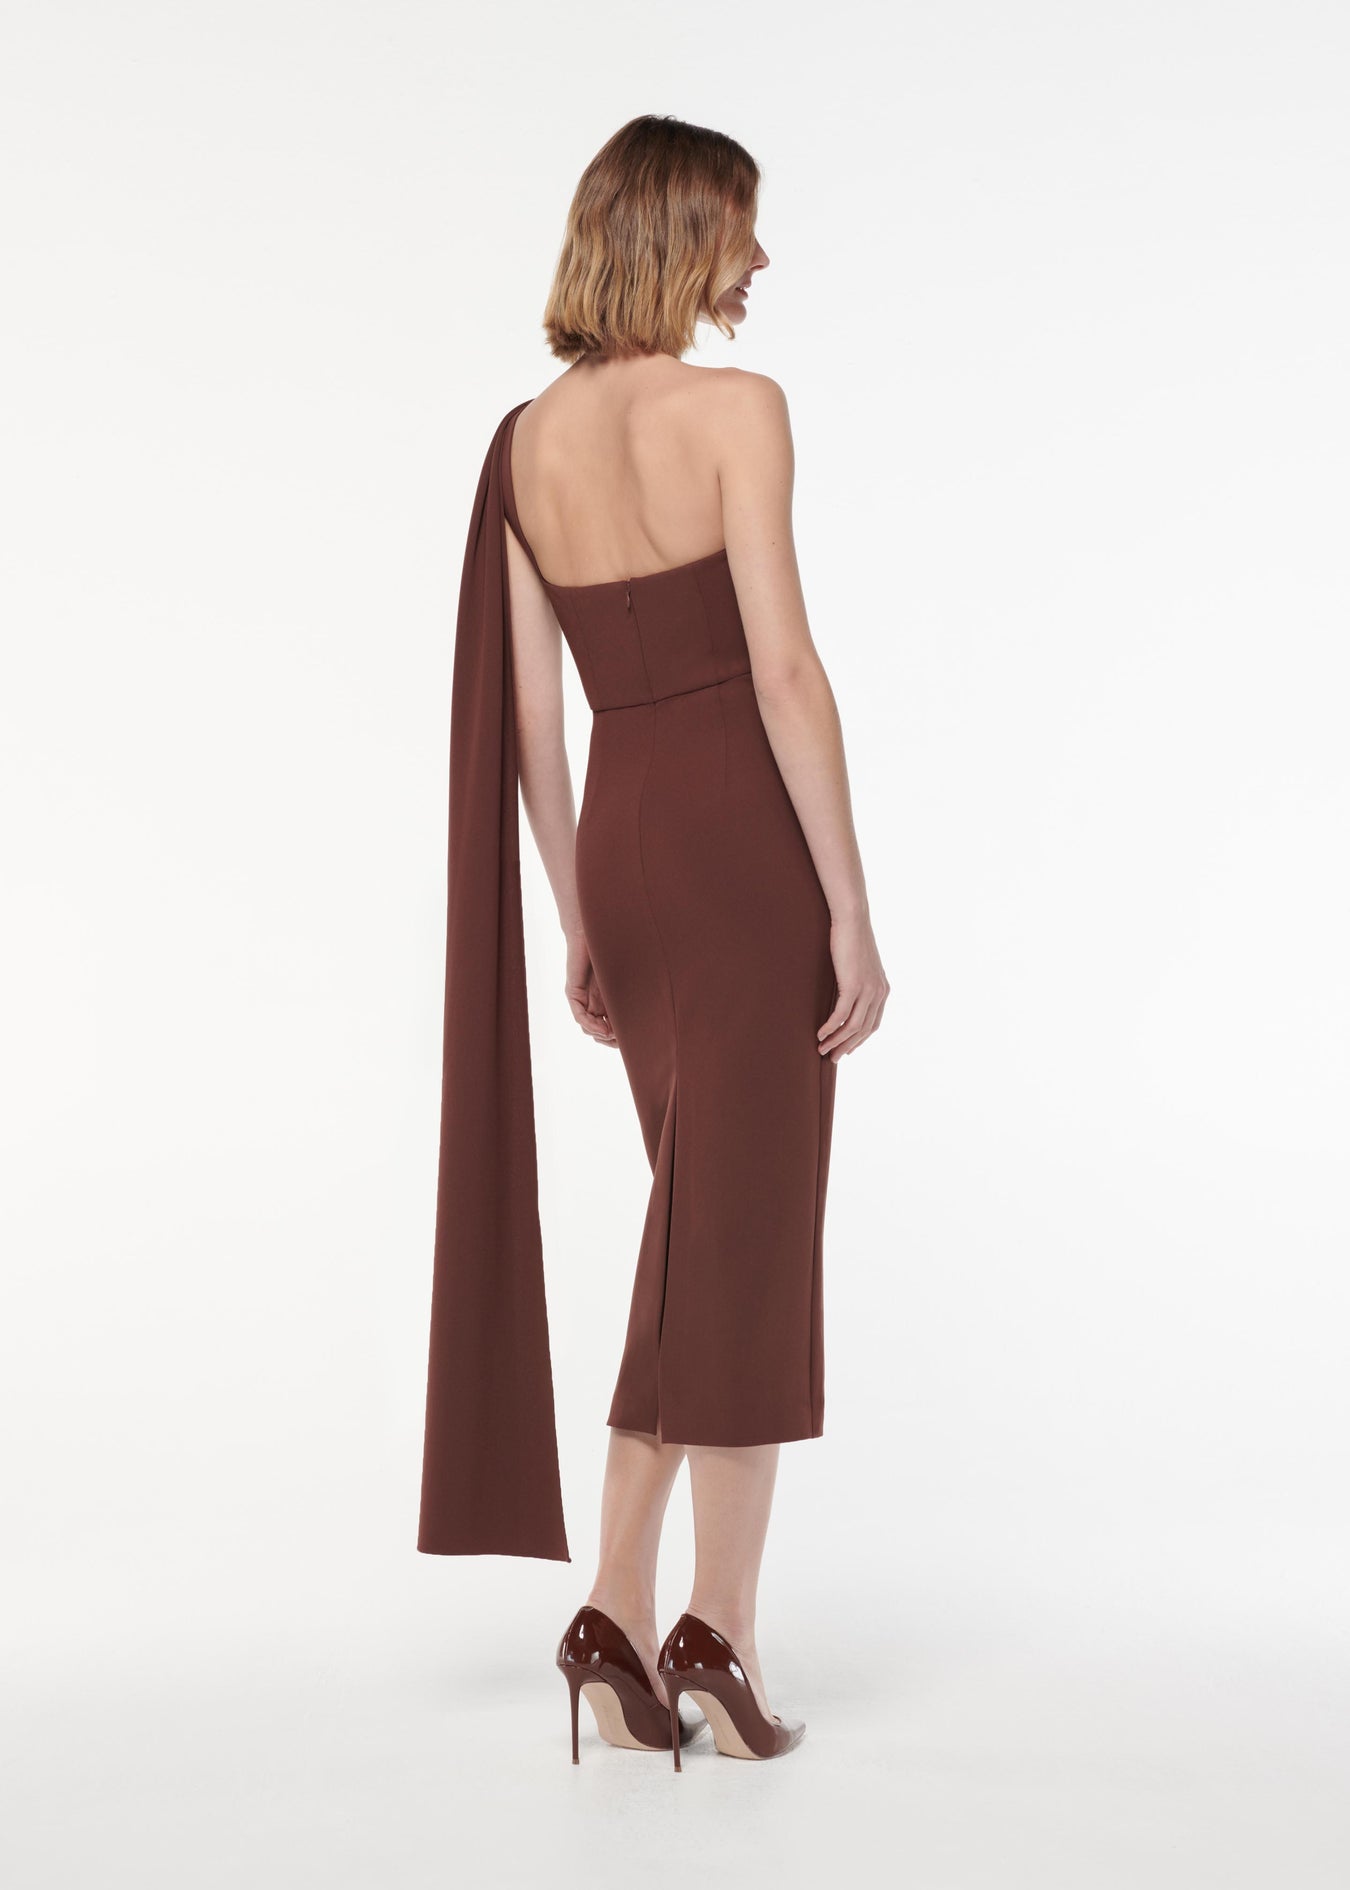 A photograph of a woman wearing aAsymmetric Heavy Cady Midi Dress in Brown